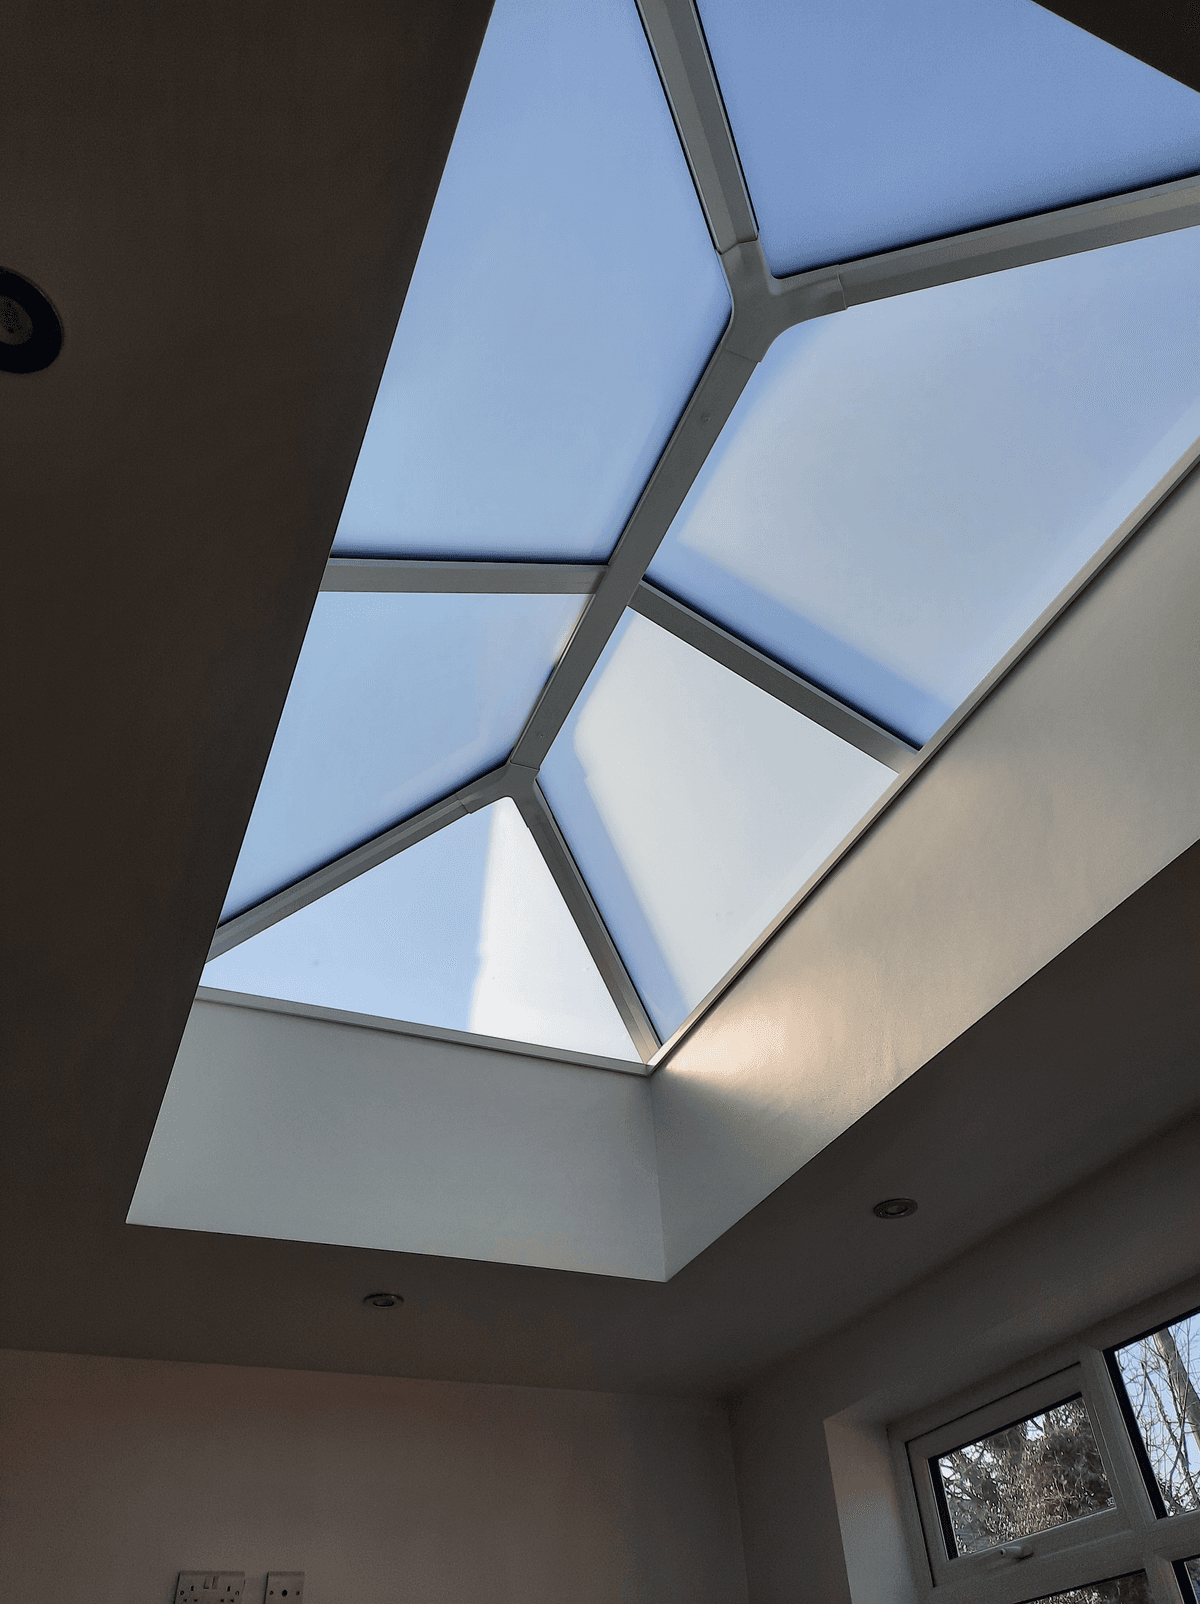 Elevate roof with frosted glass